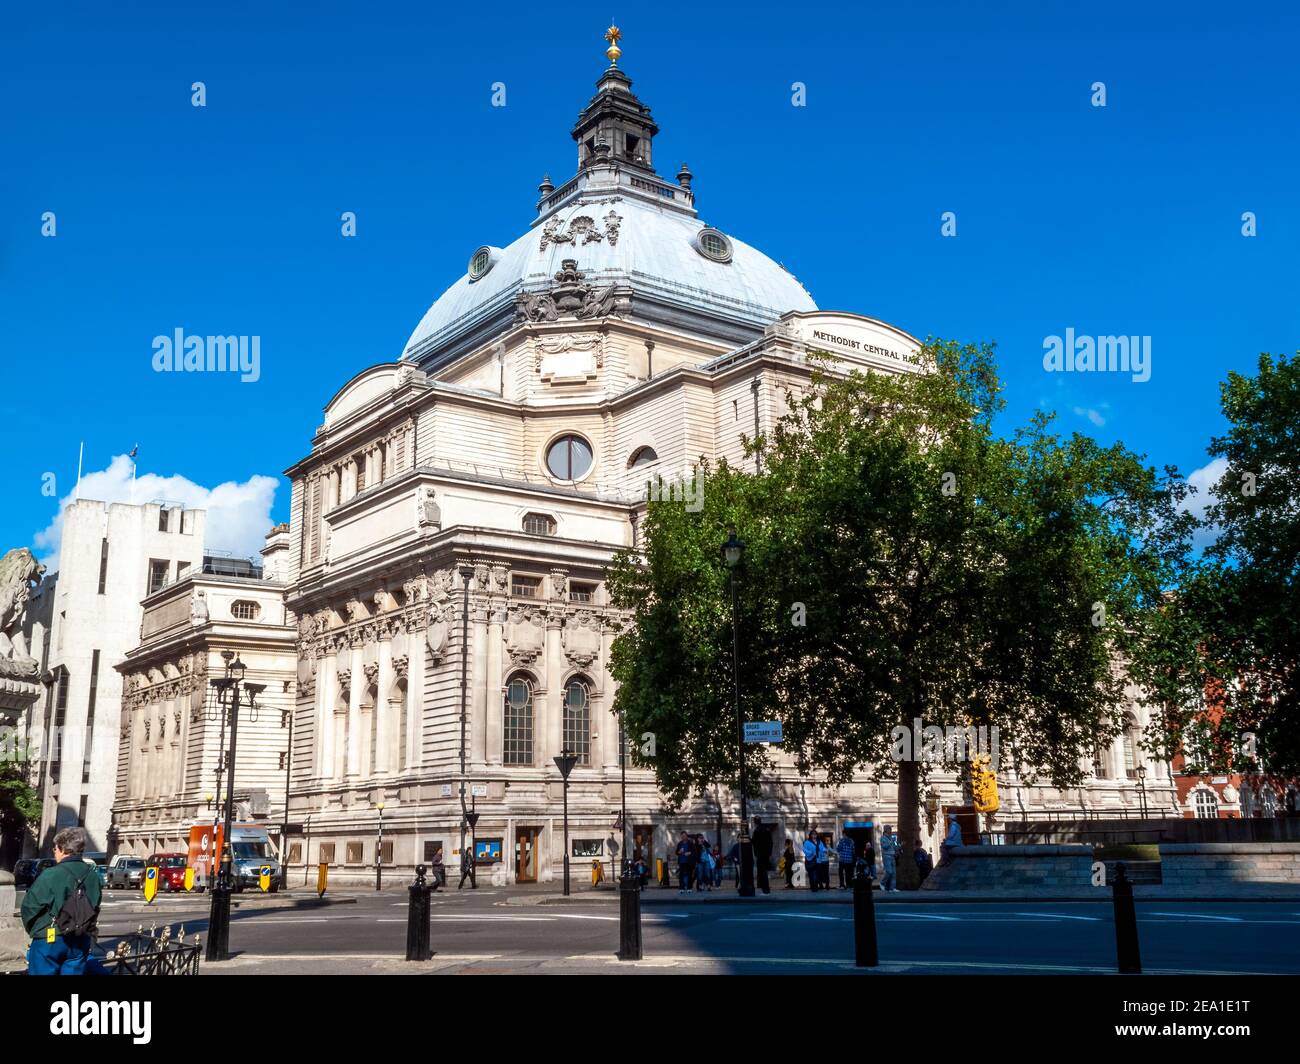 London, UK, August 28, 2010 : Methodist Central Hall (Westminster Central Hall) completed in 1908 standing opposite Westminster Abbey and is a popular Stock Photo